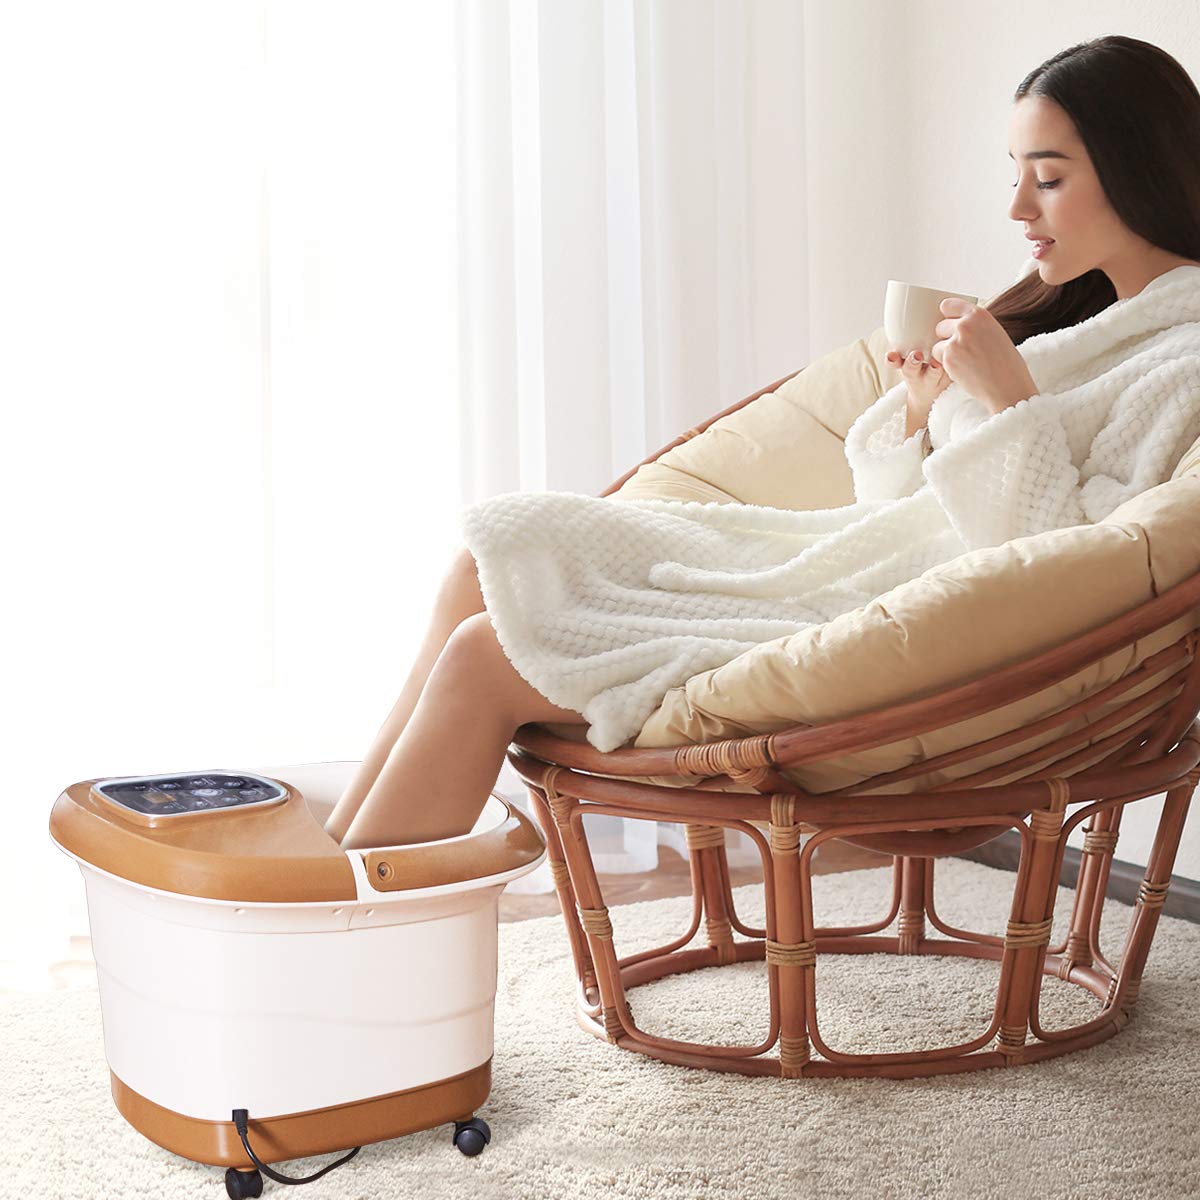  All in One Foot Spa Bath Massager - Giantex